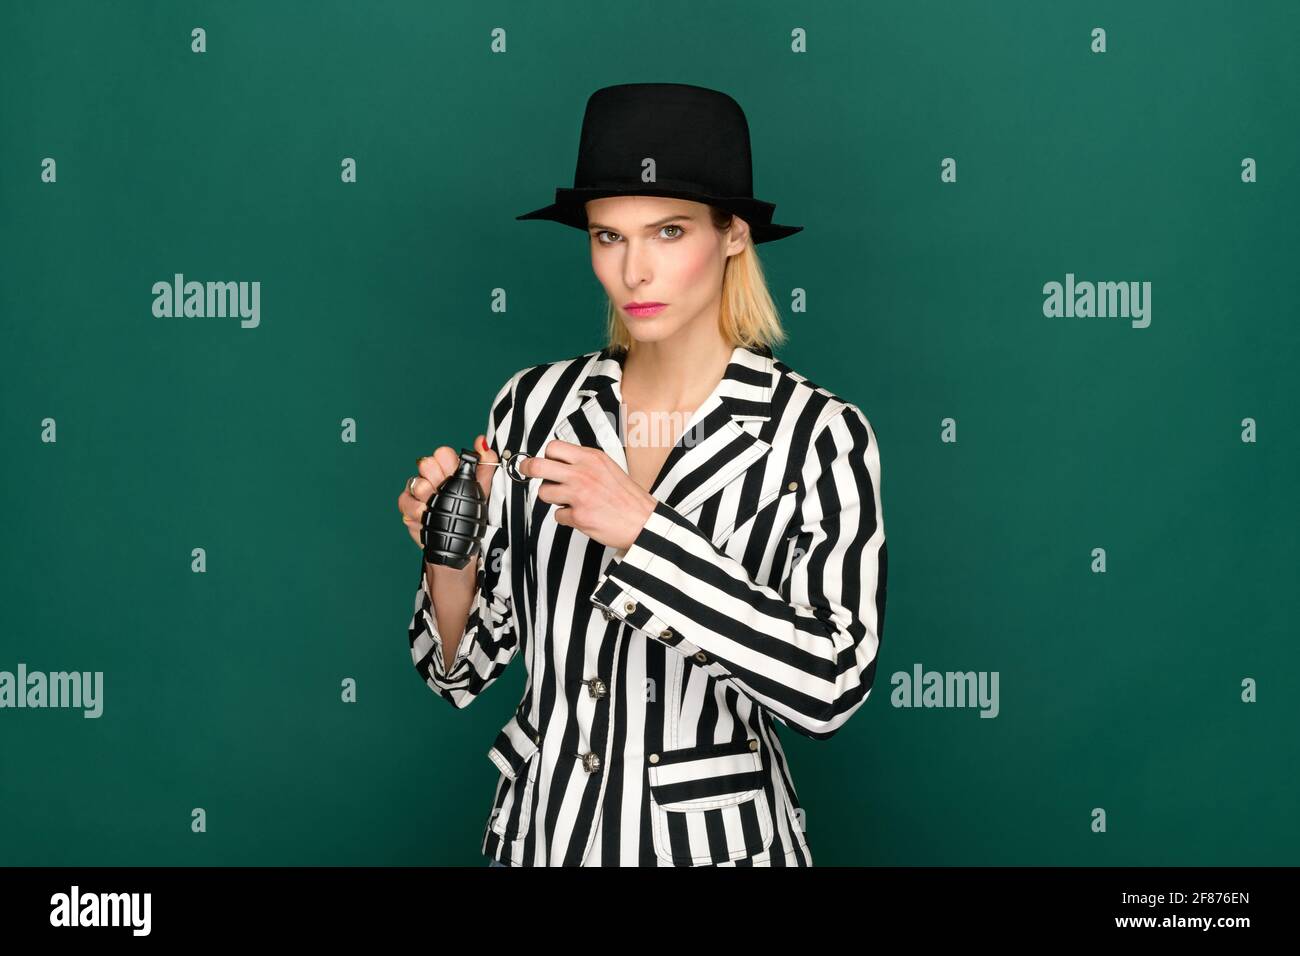 Serious female in stylish striped jacket and hat looking at camera and pulling grenade pin against green background Stock Photo